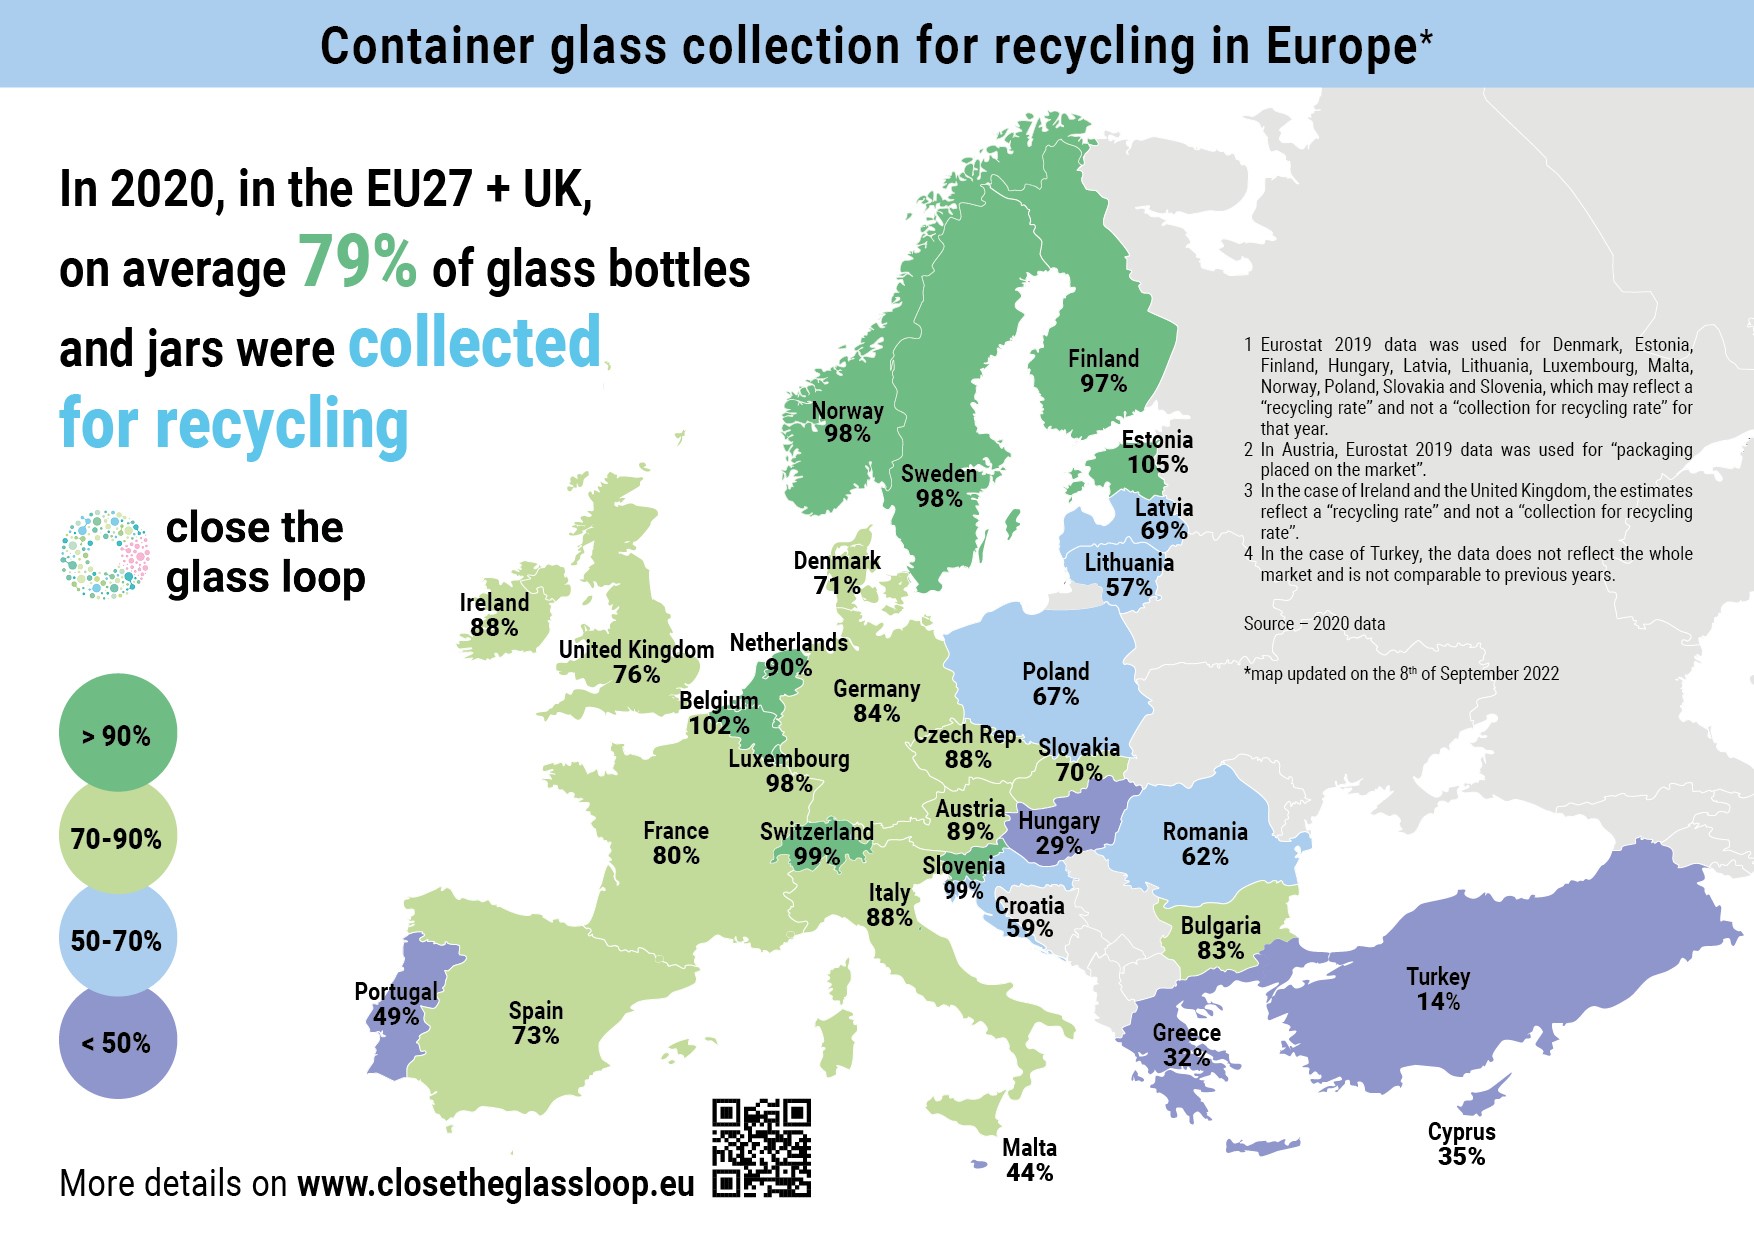 2020 Glass Collection for Recycling Rates - Map